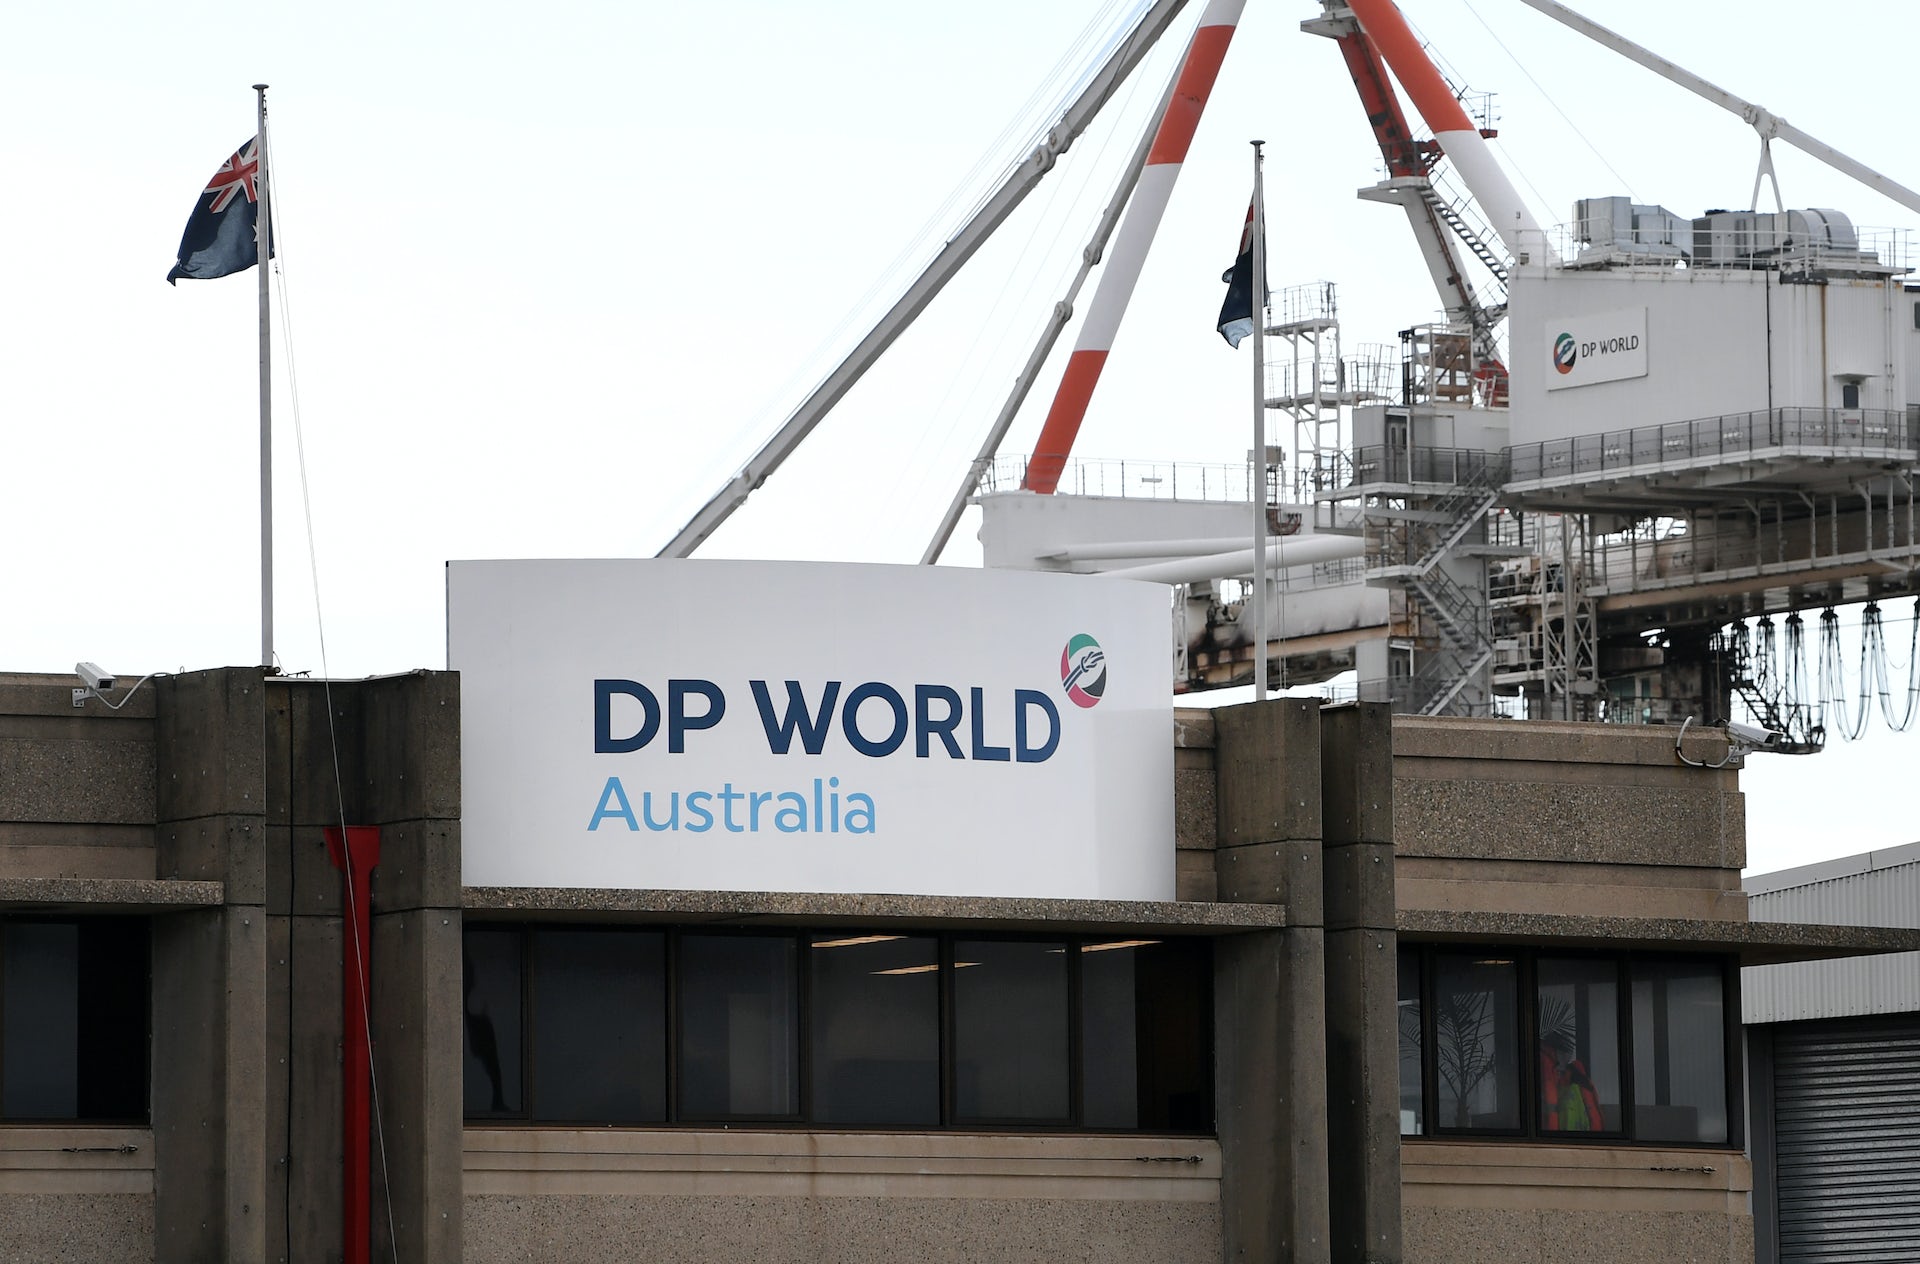 Foreign State Actor Suspected of Sabotaging Australian Ports in Significant Cyberattack